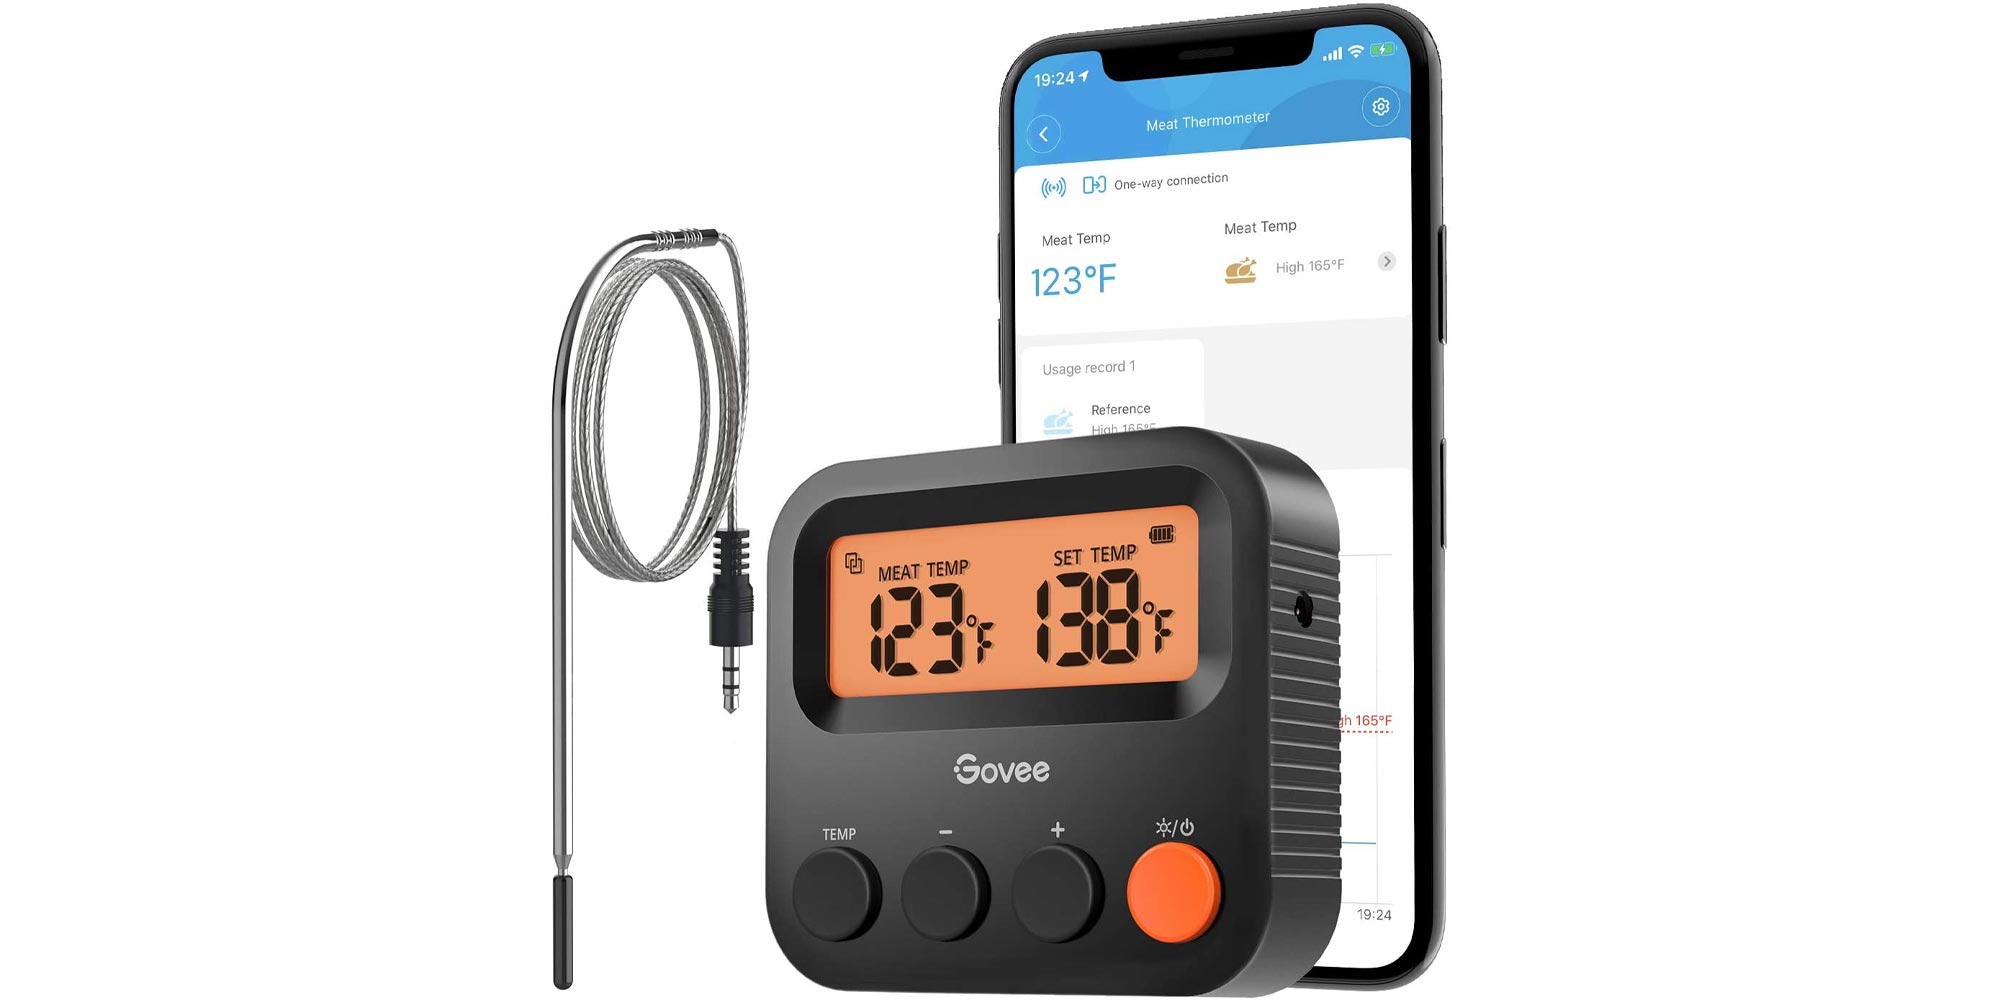 Govee Digital Bluetooth Smart Meat Thermometer Deals, Coupons 